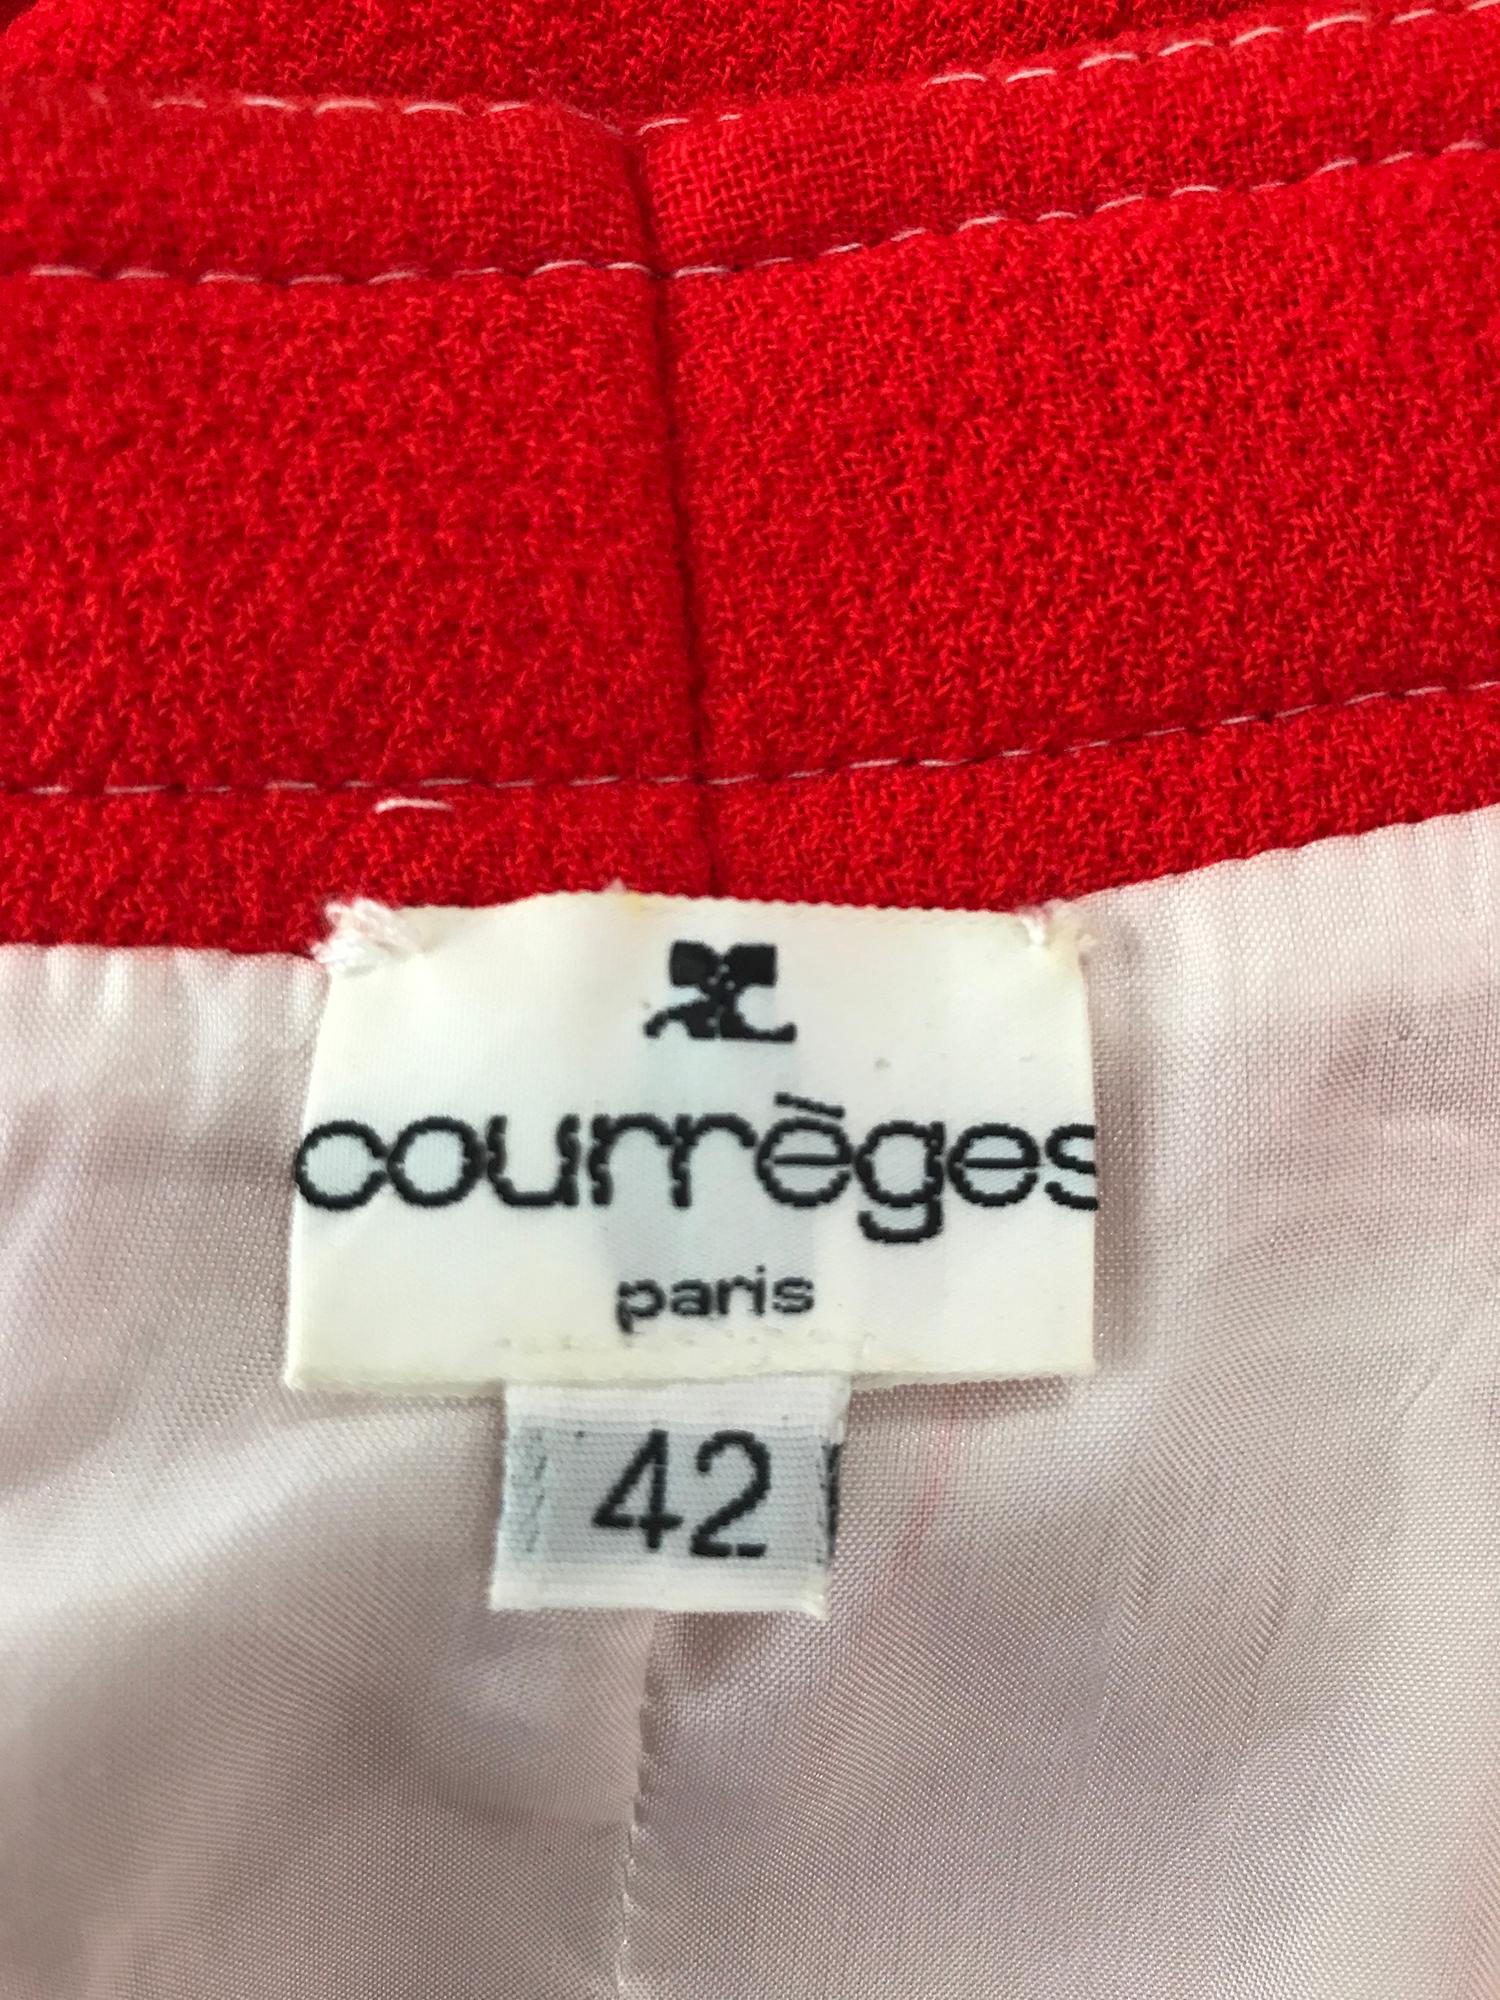 Courreges Orange Wool A Line Skirt White Top Stitching 42 For Sale 3